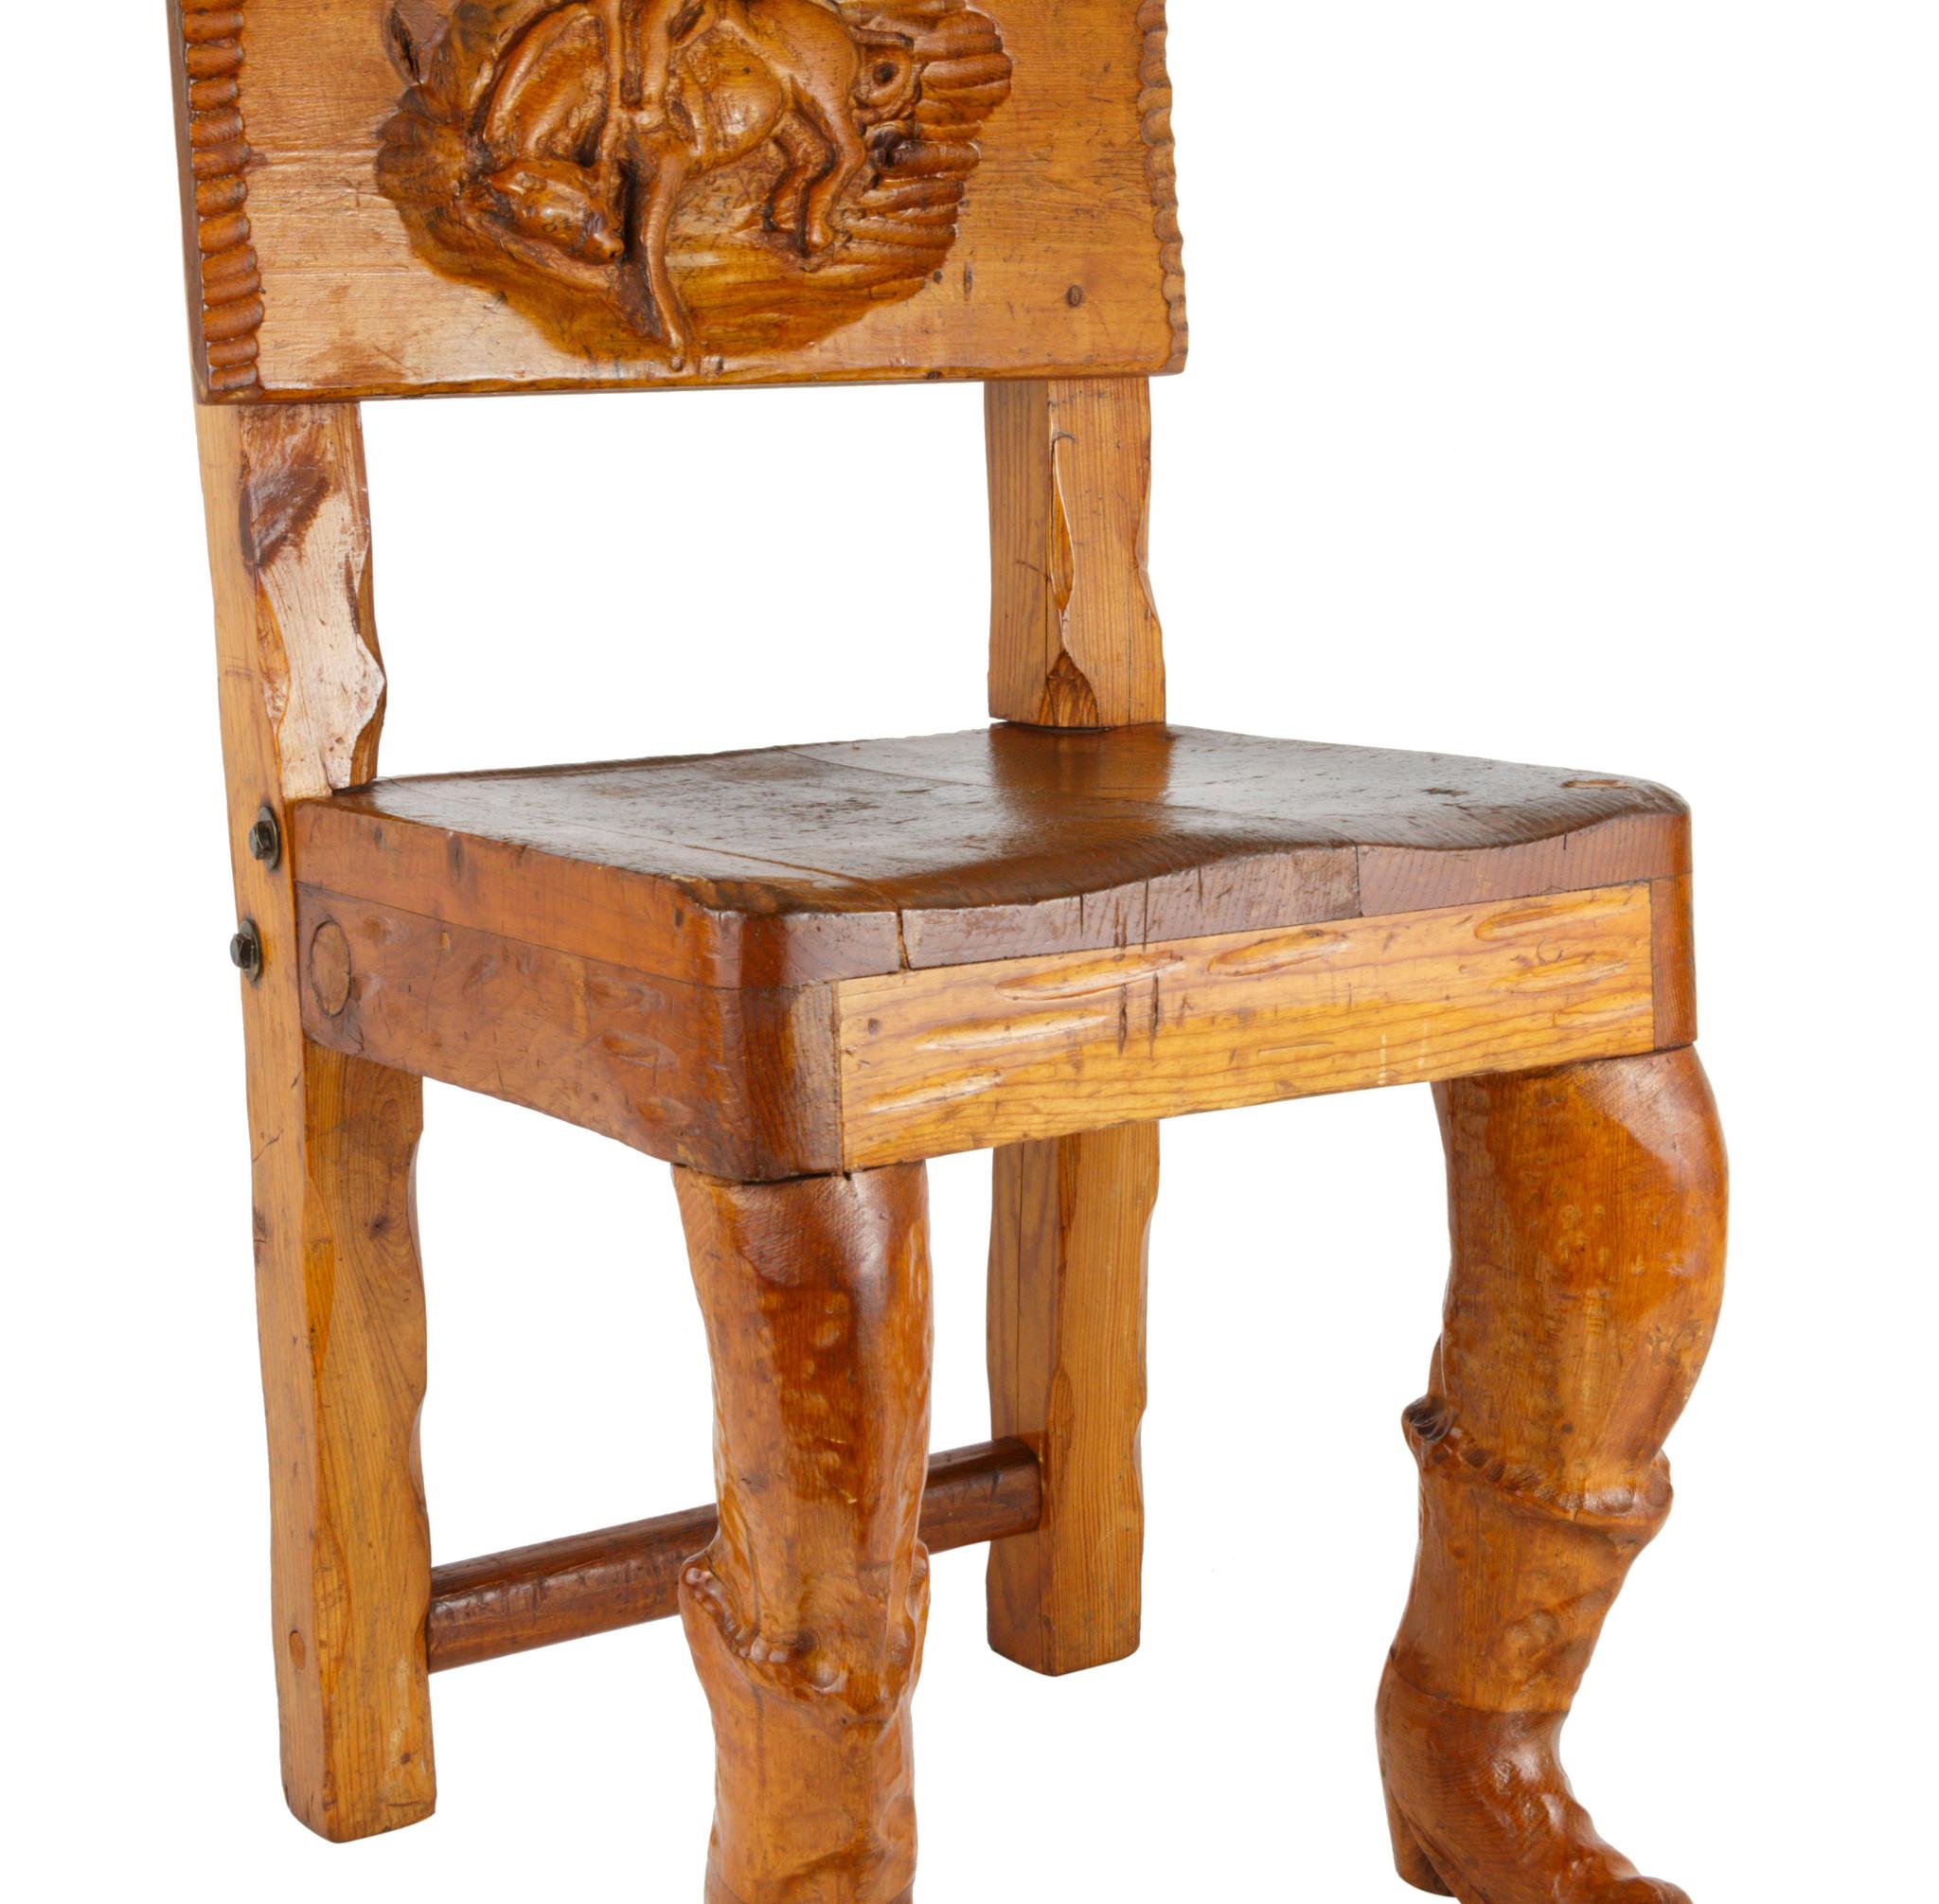 Wooden child's chair feature wooden front feet carved resemble cowboy boots and relief carving of a bucking bronco on chair back. Maker unknown.

Period: First Half of the 20th Century

Origin: Western United States

Size: 13